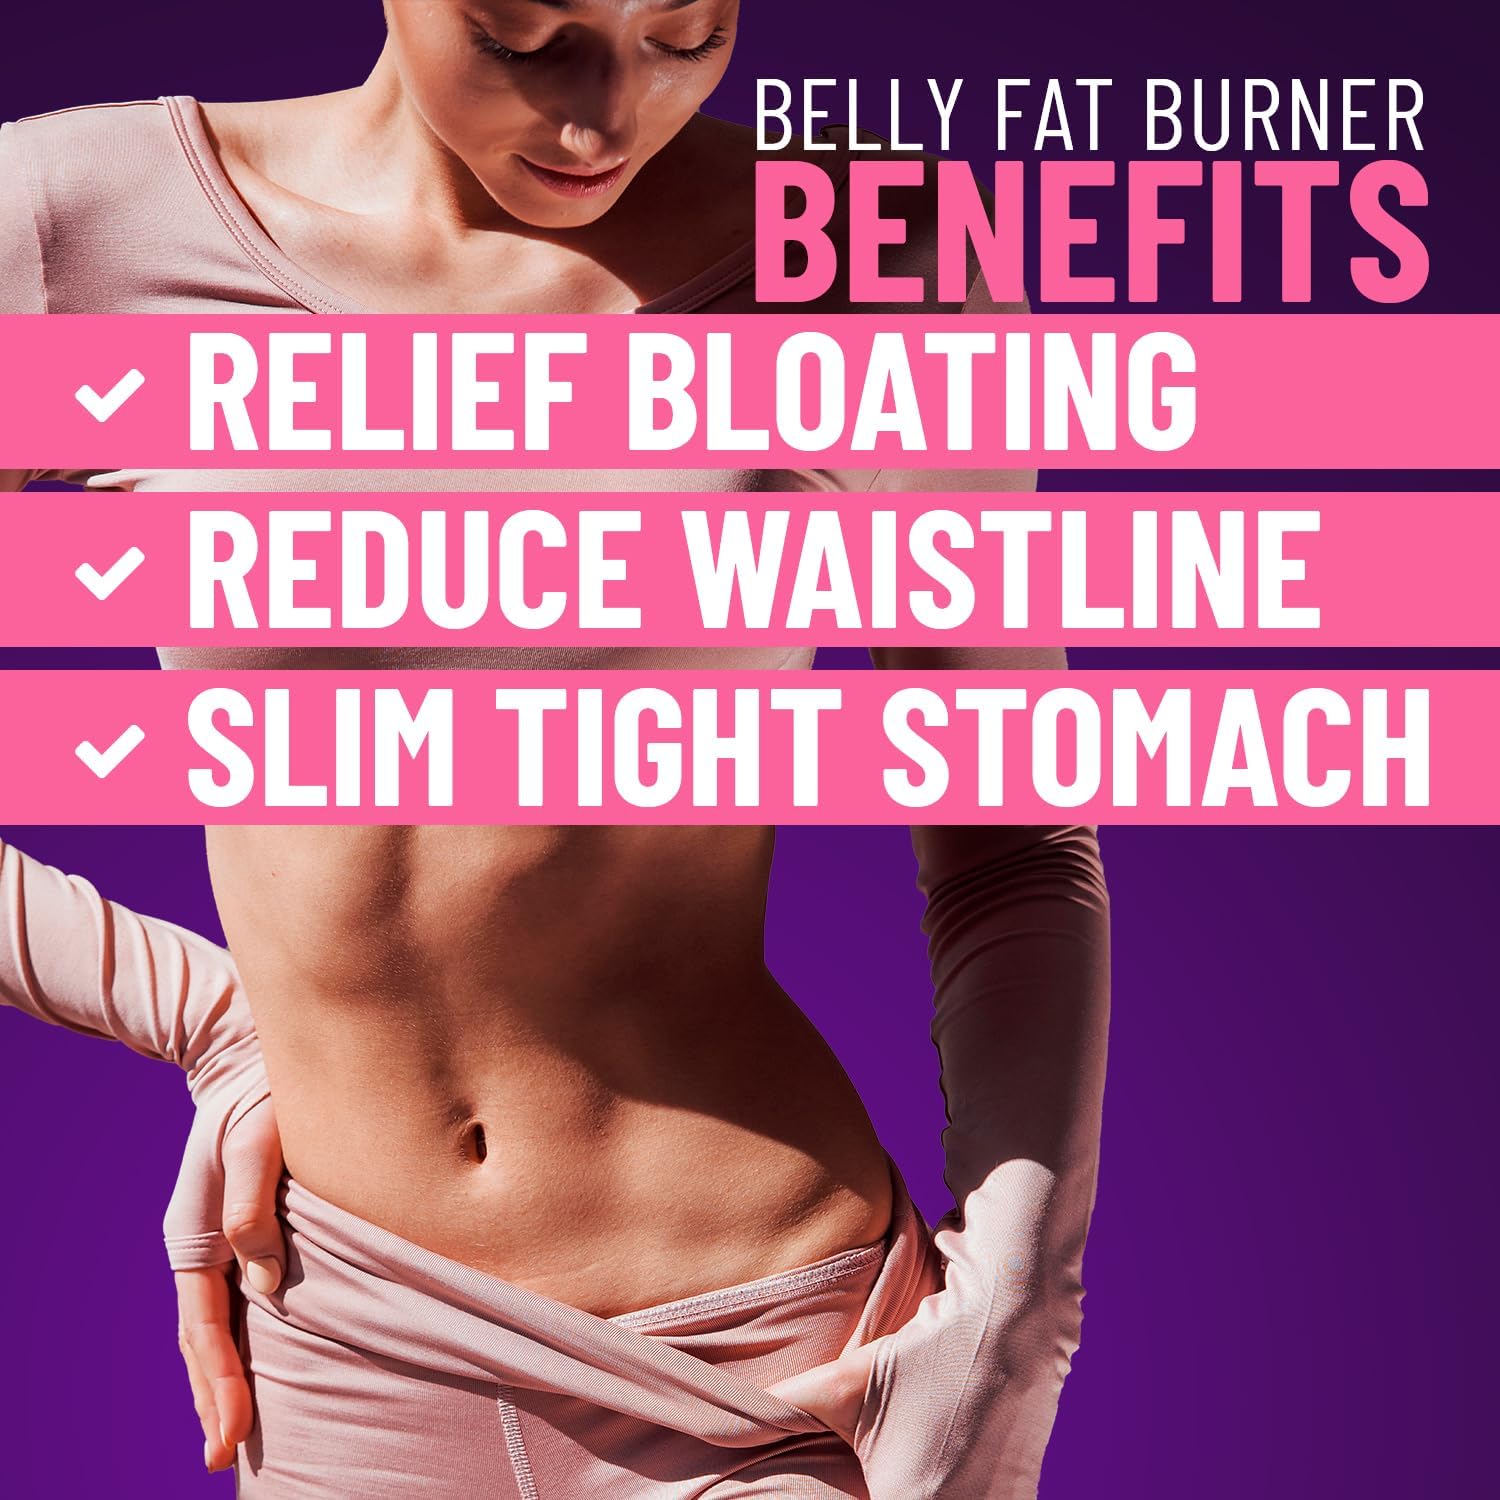 Helix Heal Belly Fat Burner for Women - Lose Stomach Fat w/Softgel Diet Pills for Weight Loss to Reduce Bloating - Keto Safe Weight Loss  Appetite Suppressant Supplement